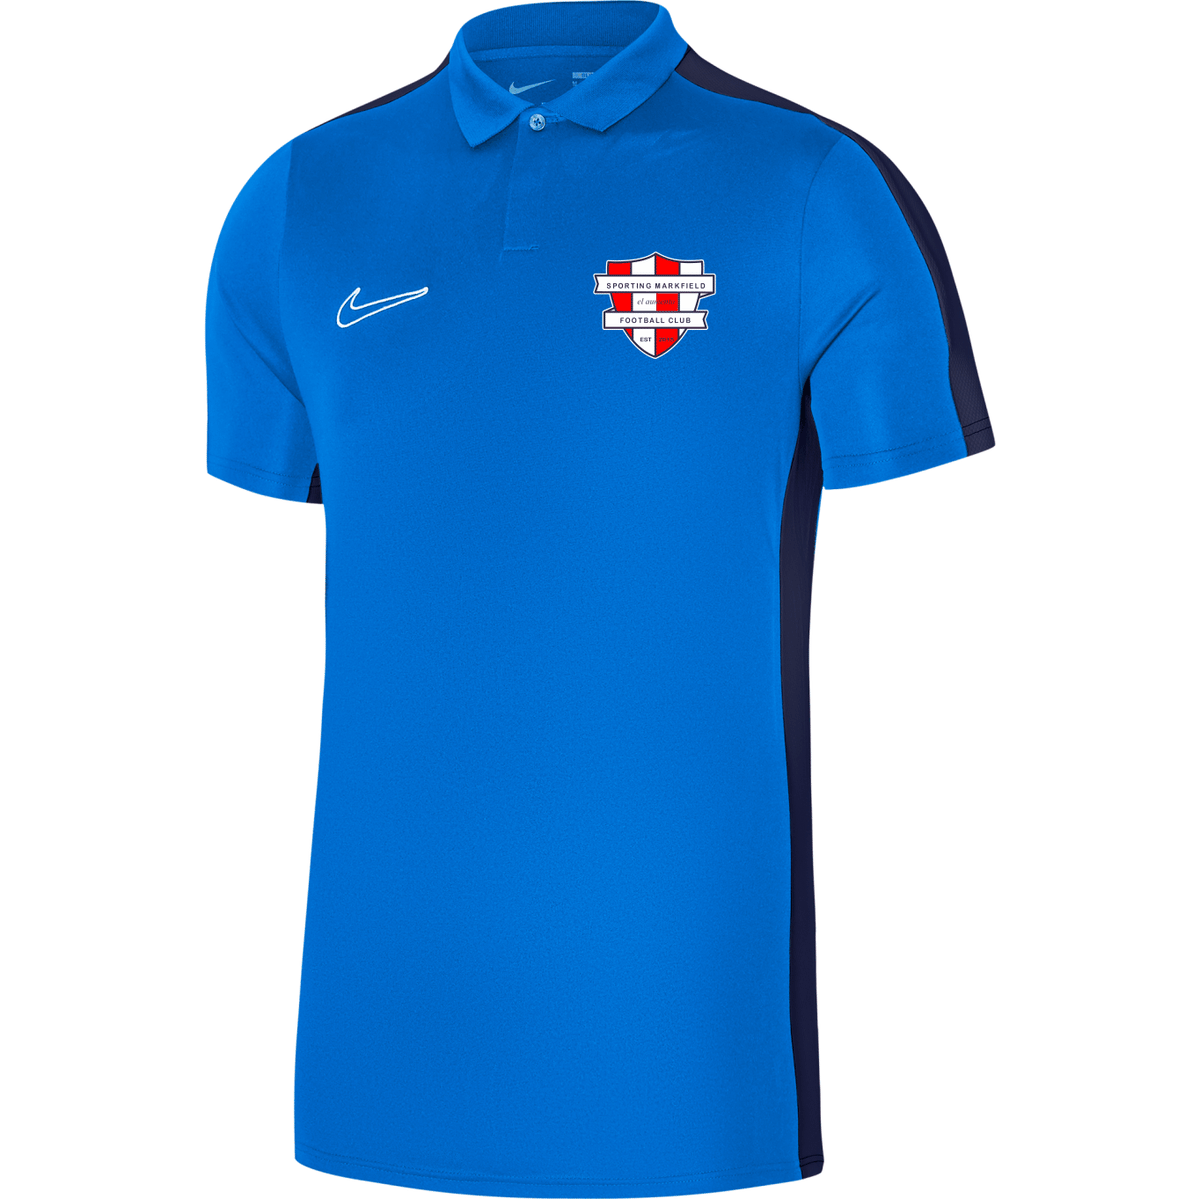 Sporting Markfield Coaches - Academy 23 Polo Top